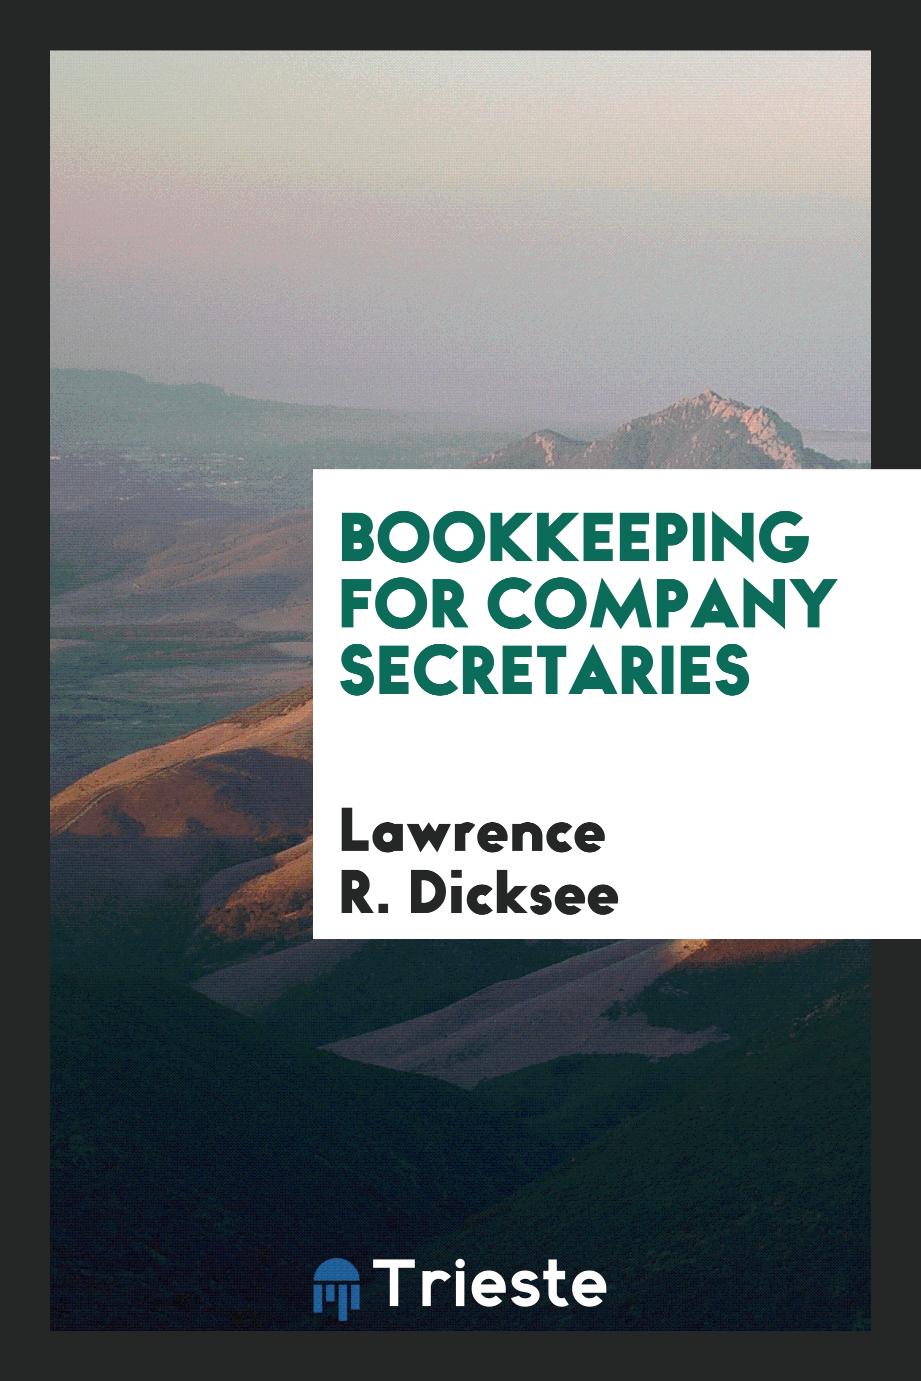 Bookkeeping for company secretaries